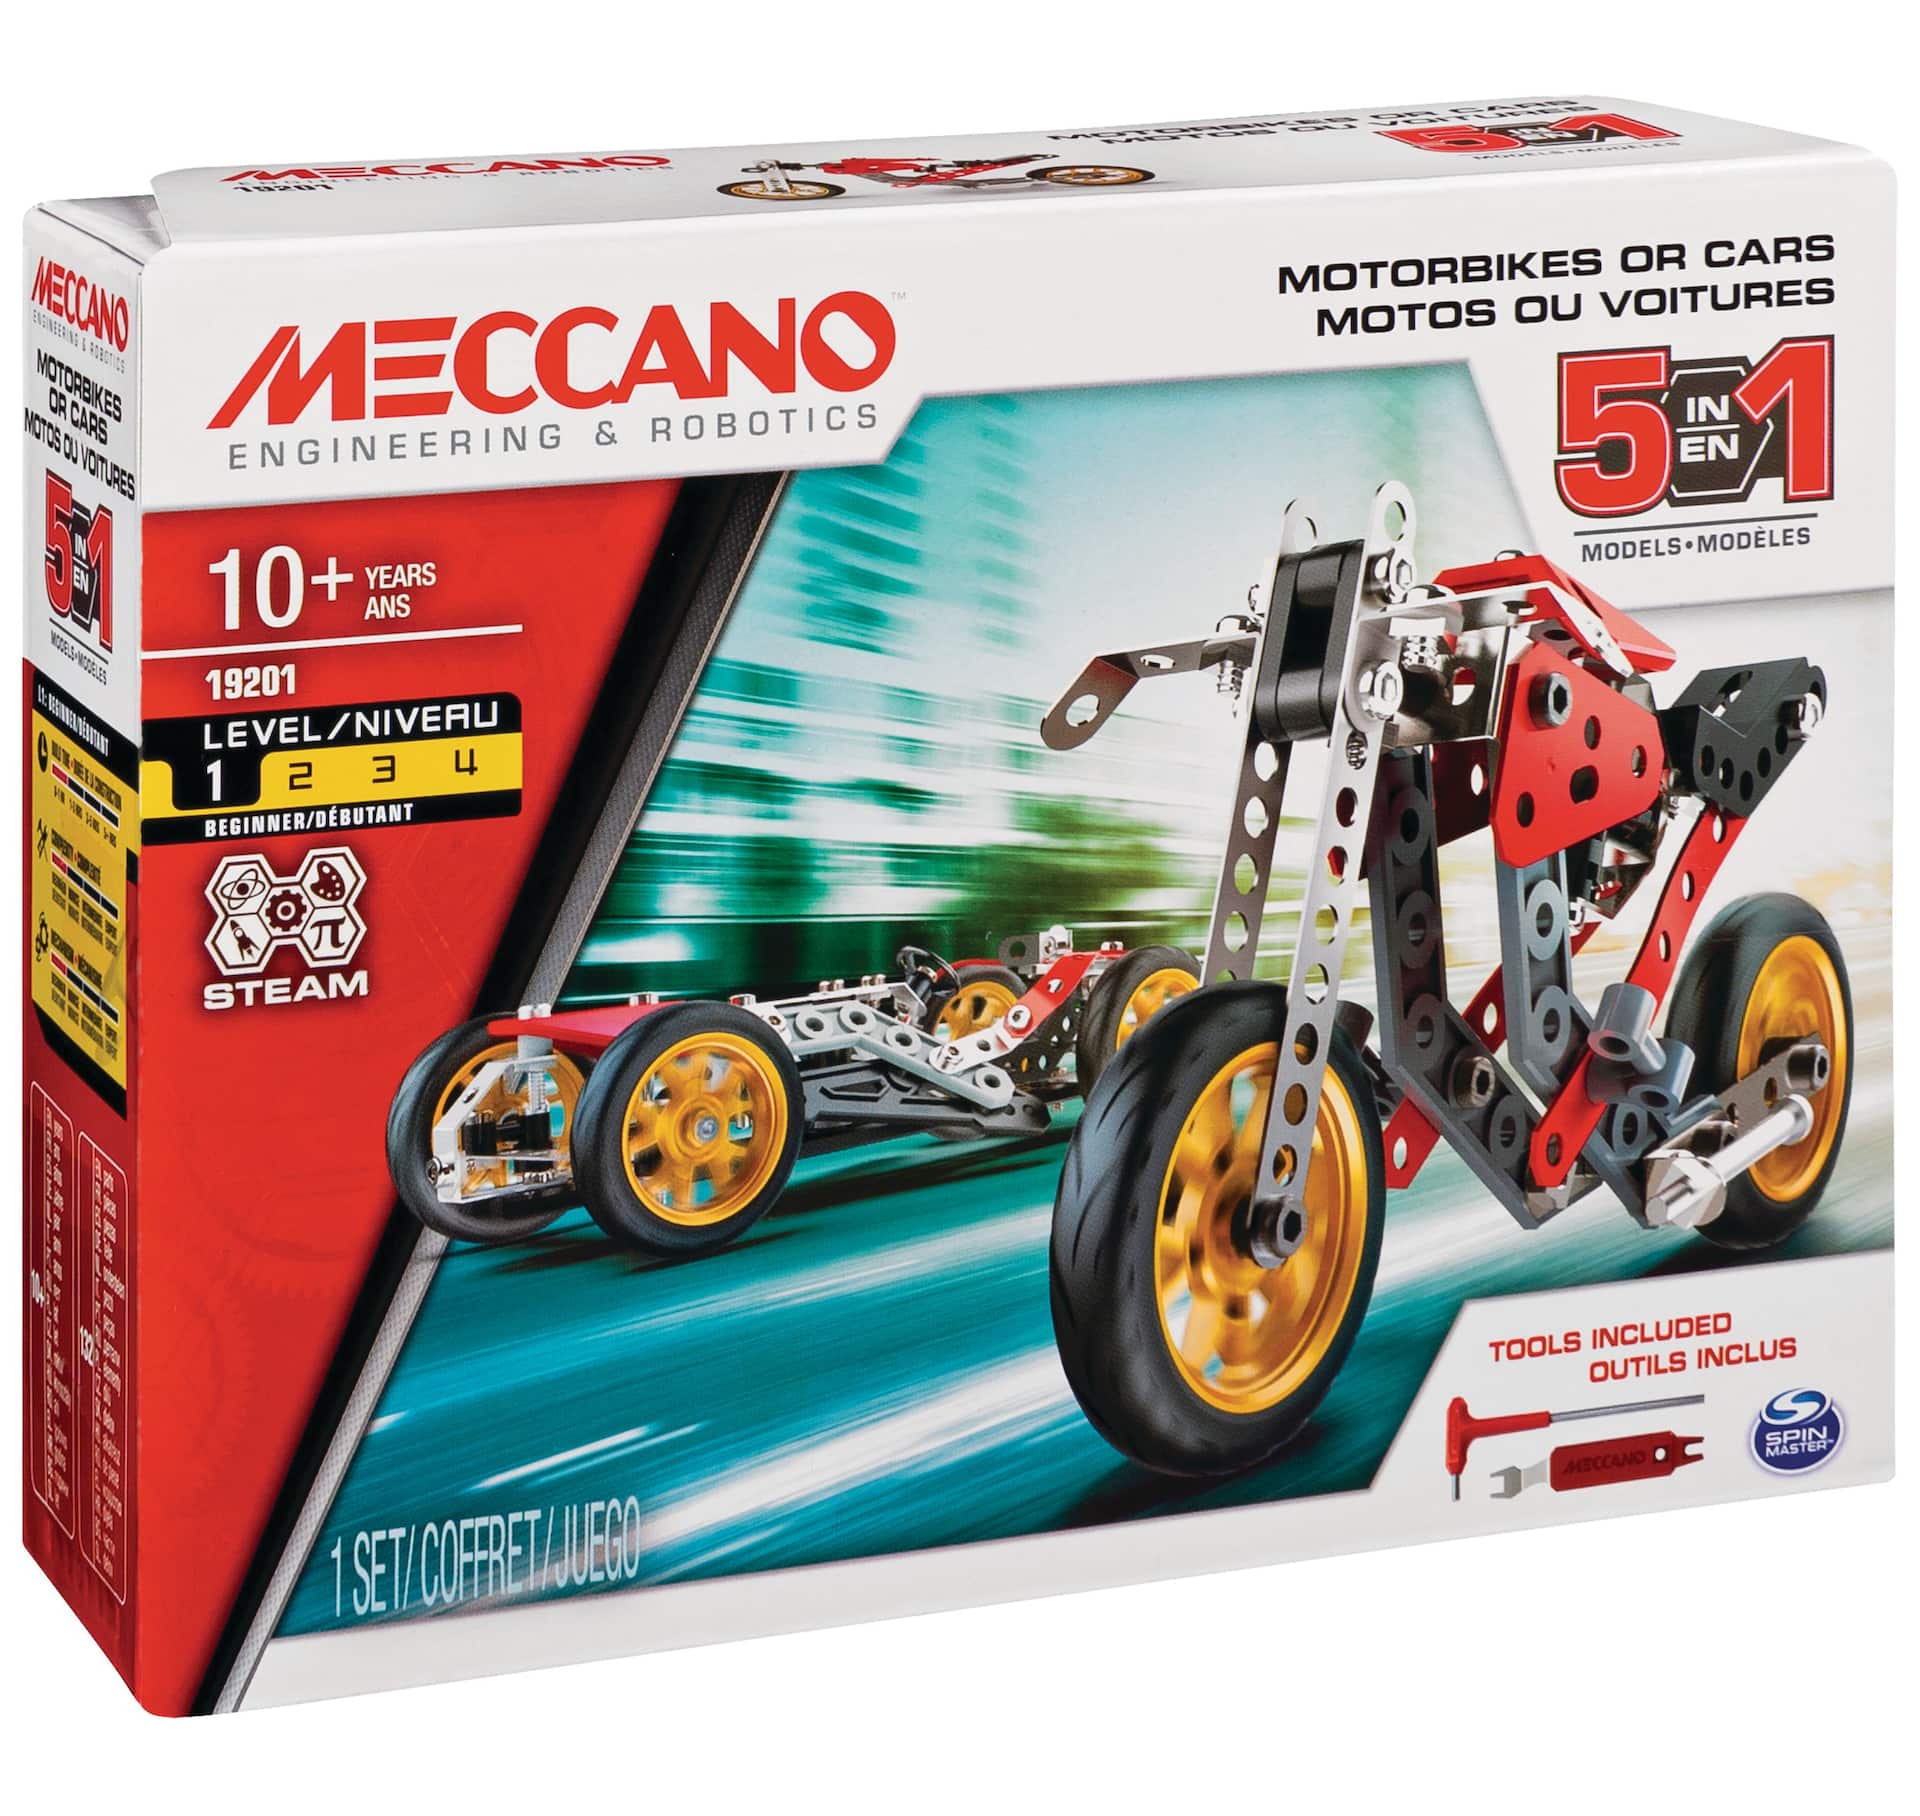 Meccano 5-In-1 Motorbikes Or Cars Model Building Kit 19201 STEAM Education  Toy, Ages 10+